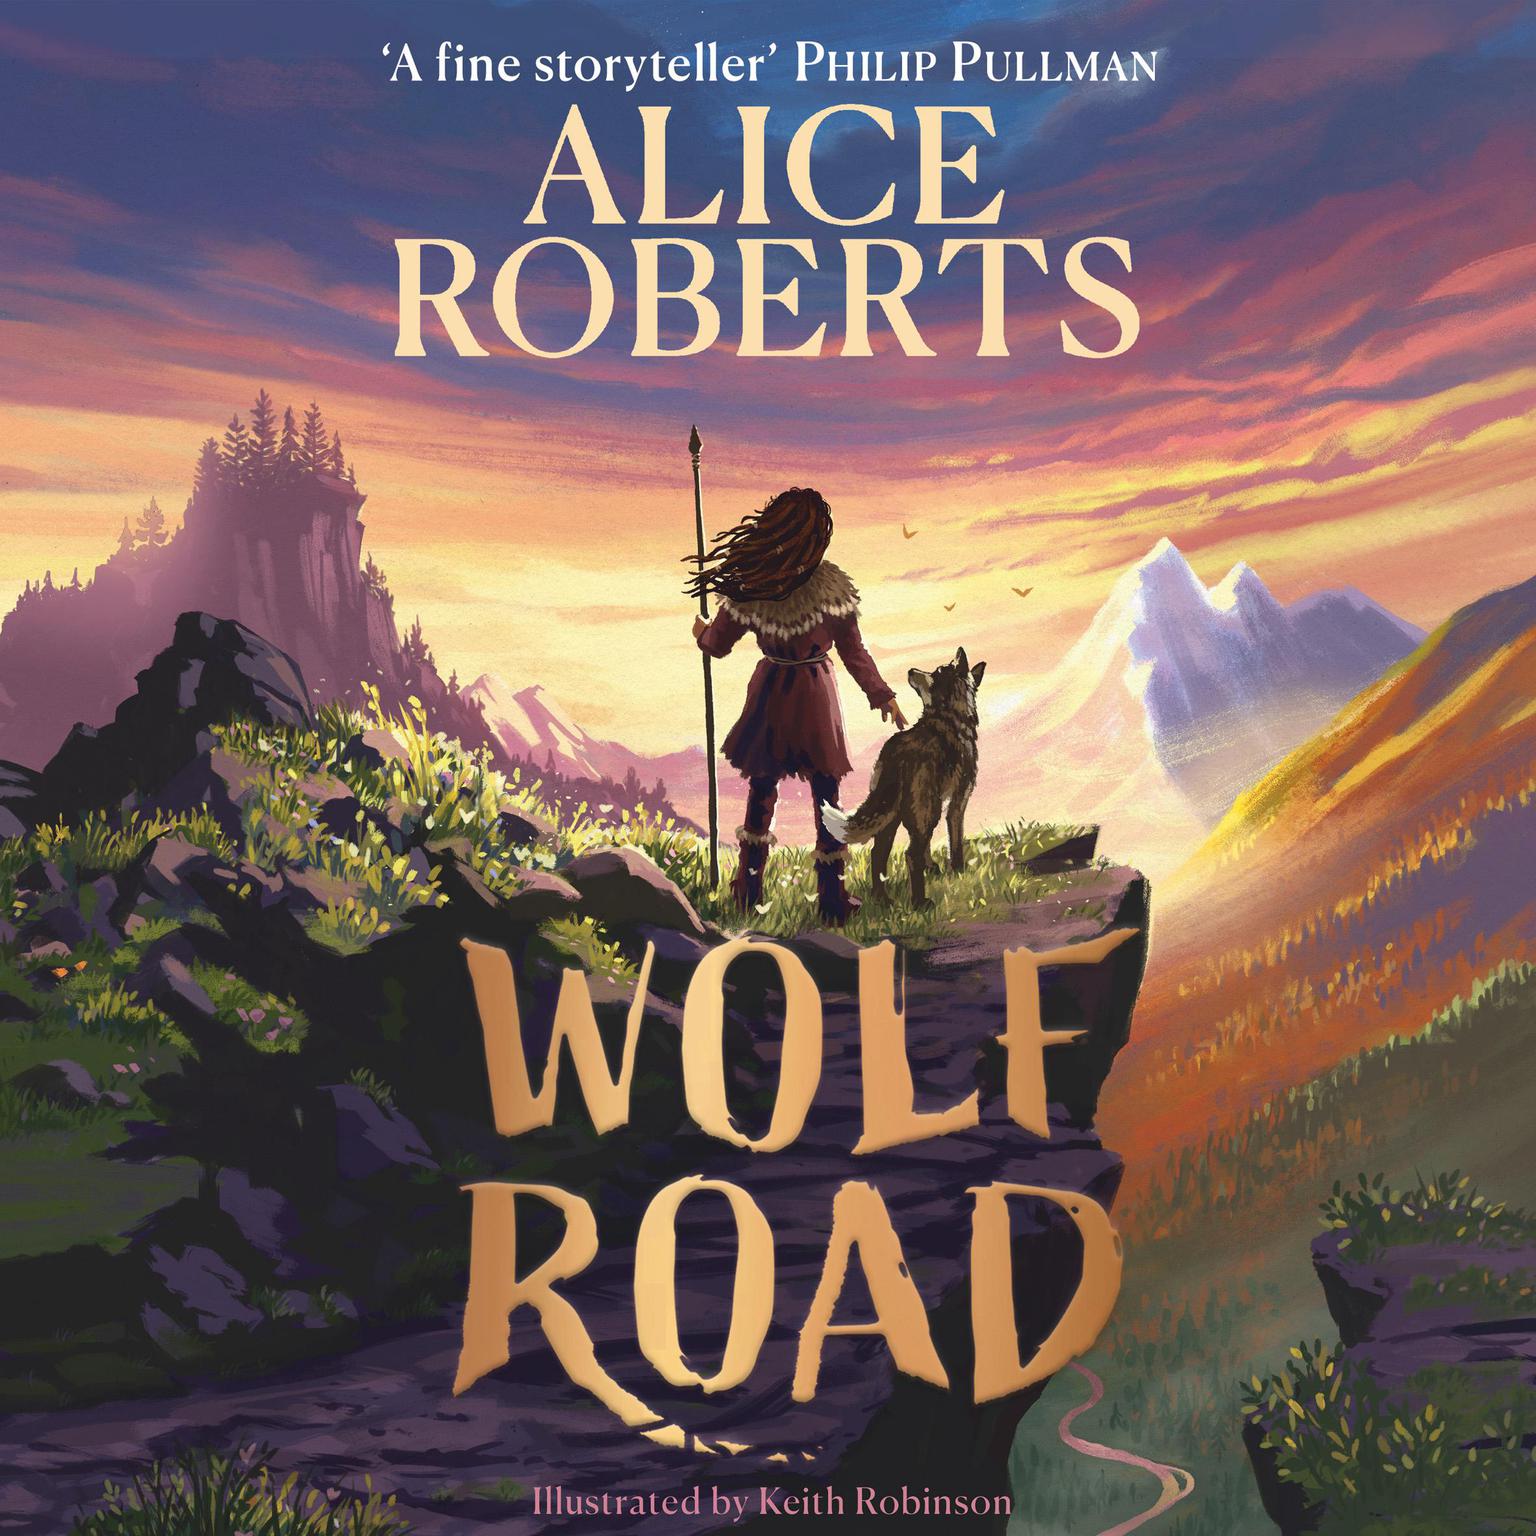 Wolf Road: The Times Childrens Book of the Week Audiobook, by Alice Roberts